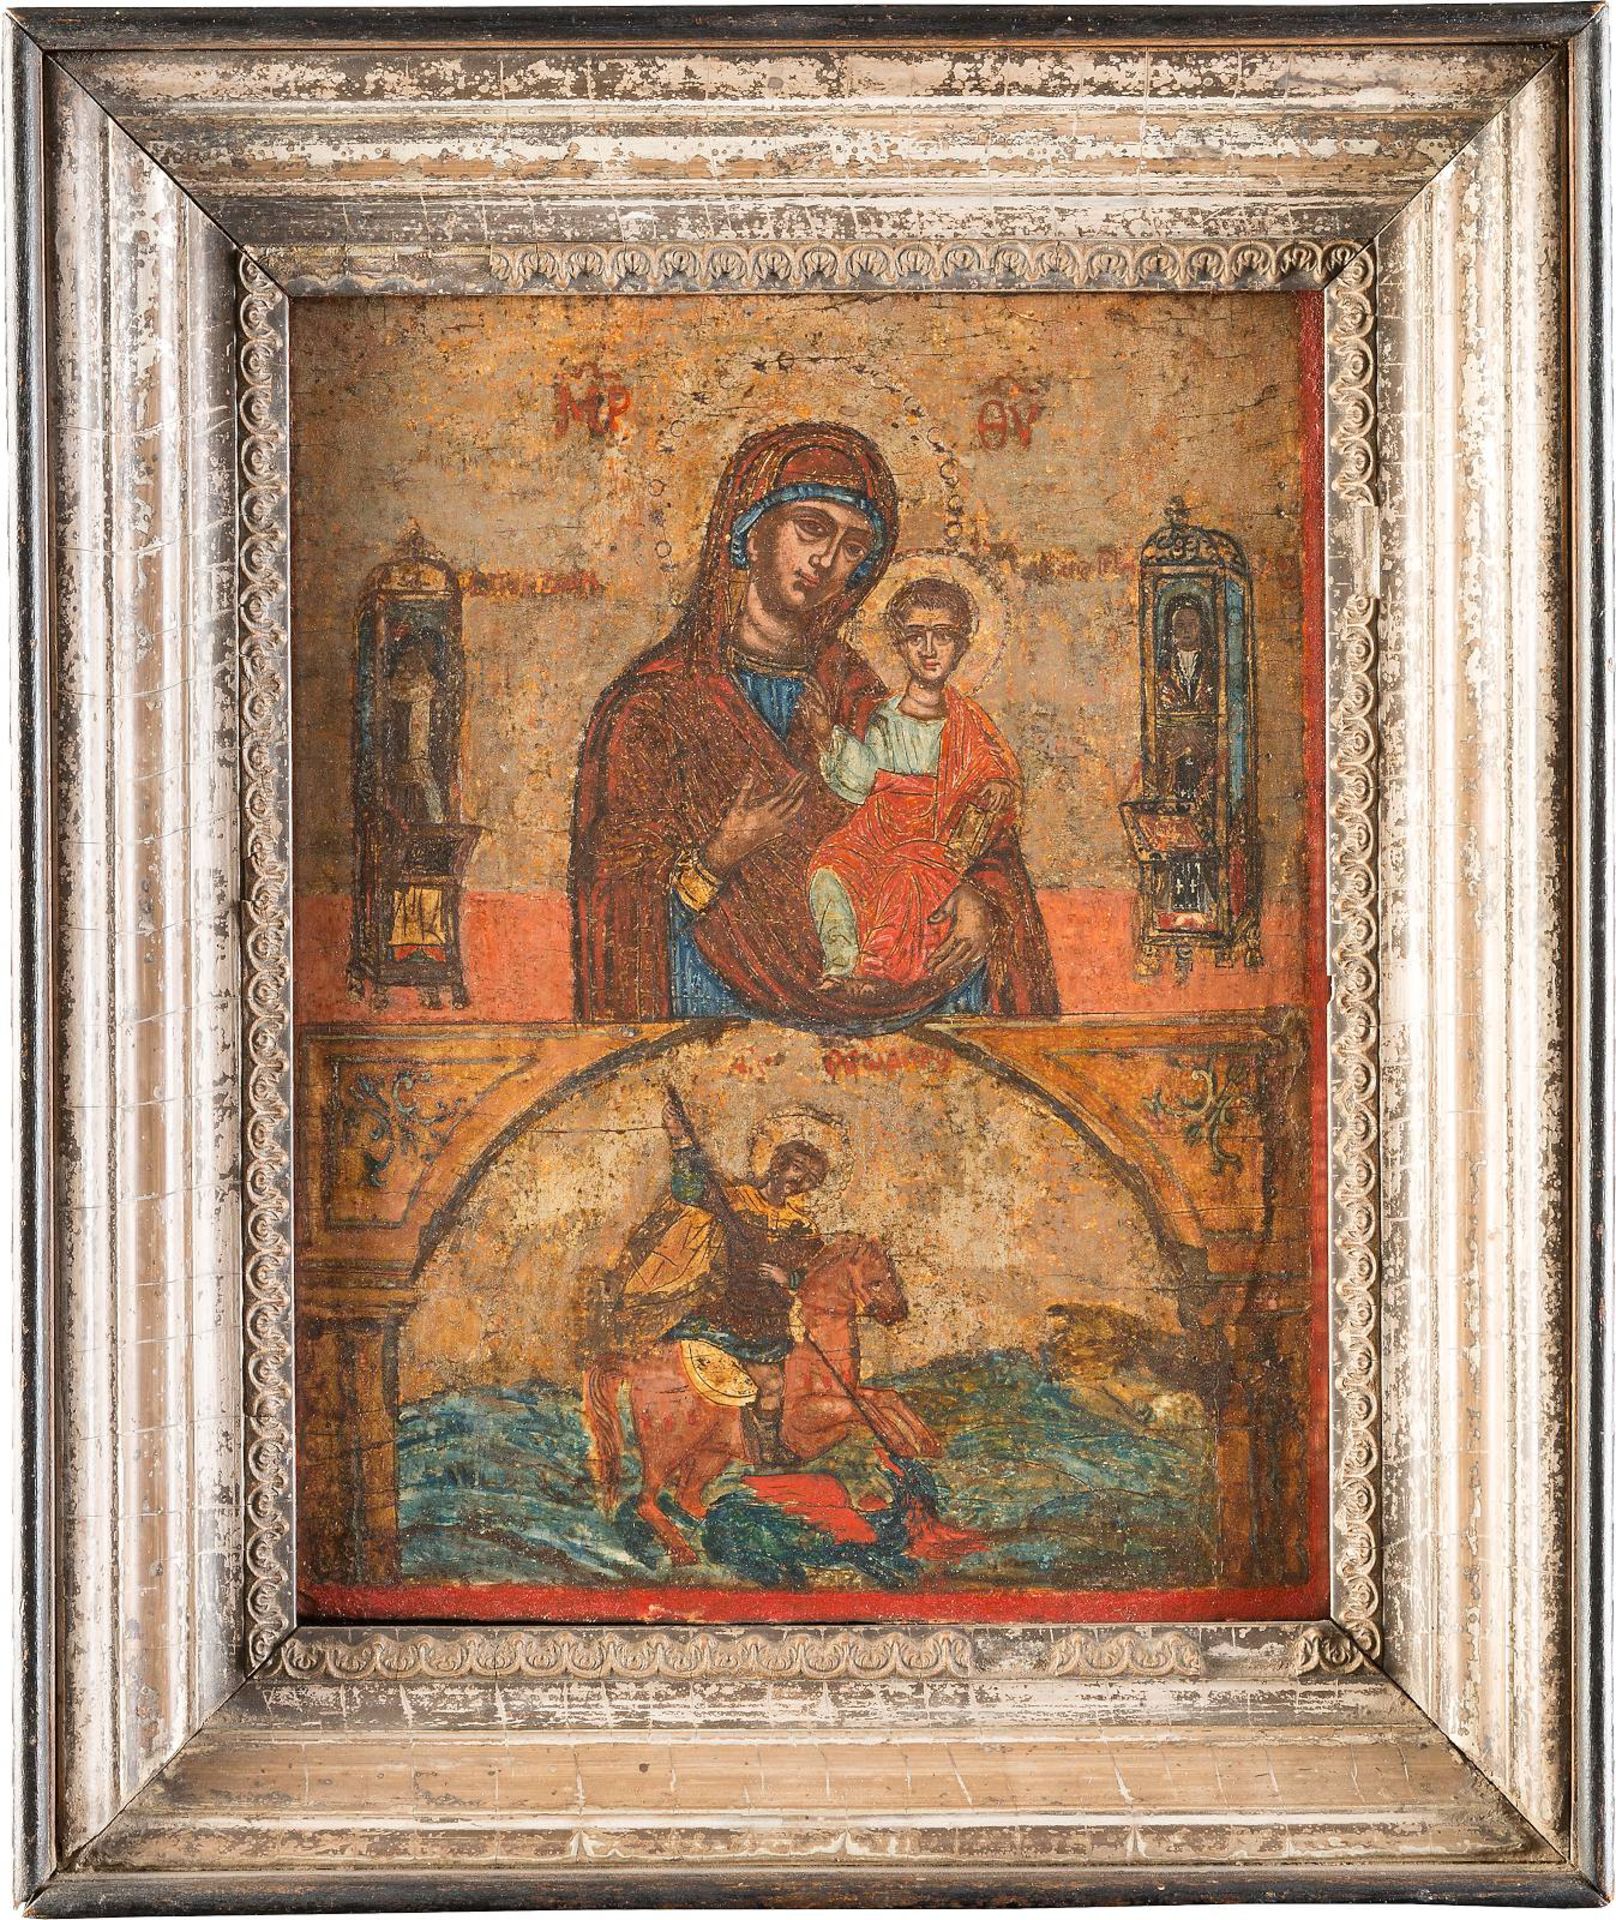 A TWO-PARTITE ICONGreek, 18th century Tempera on wood panel. The icon divided in two registers,